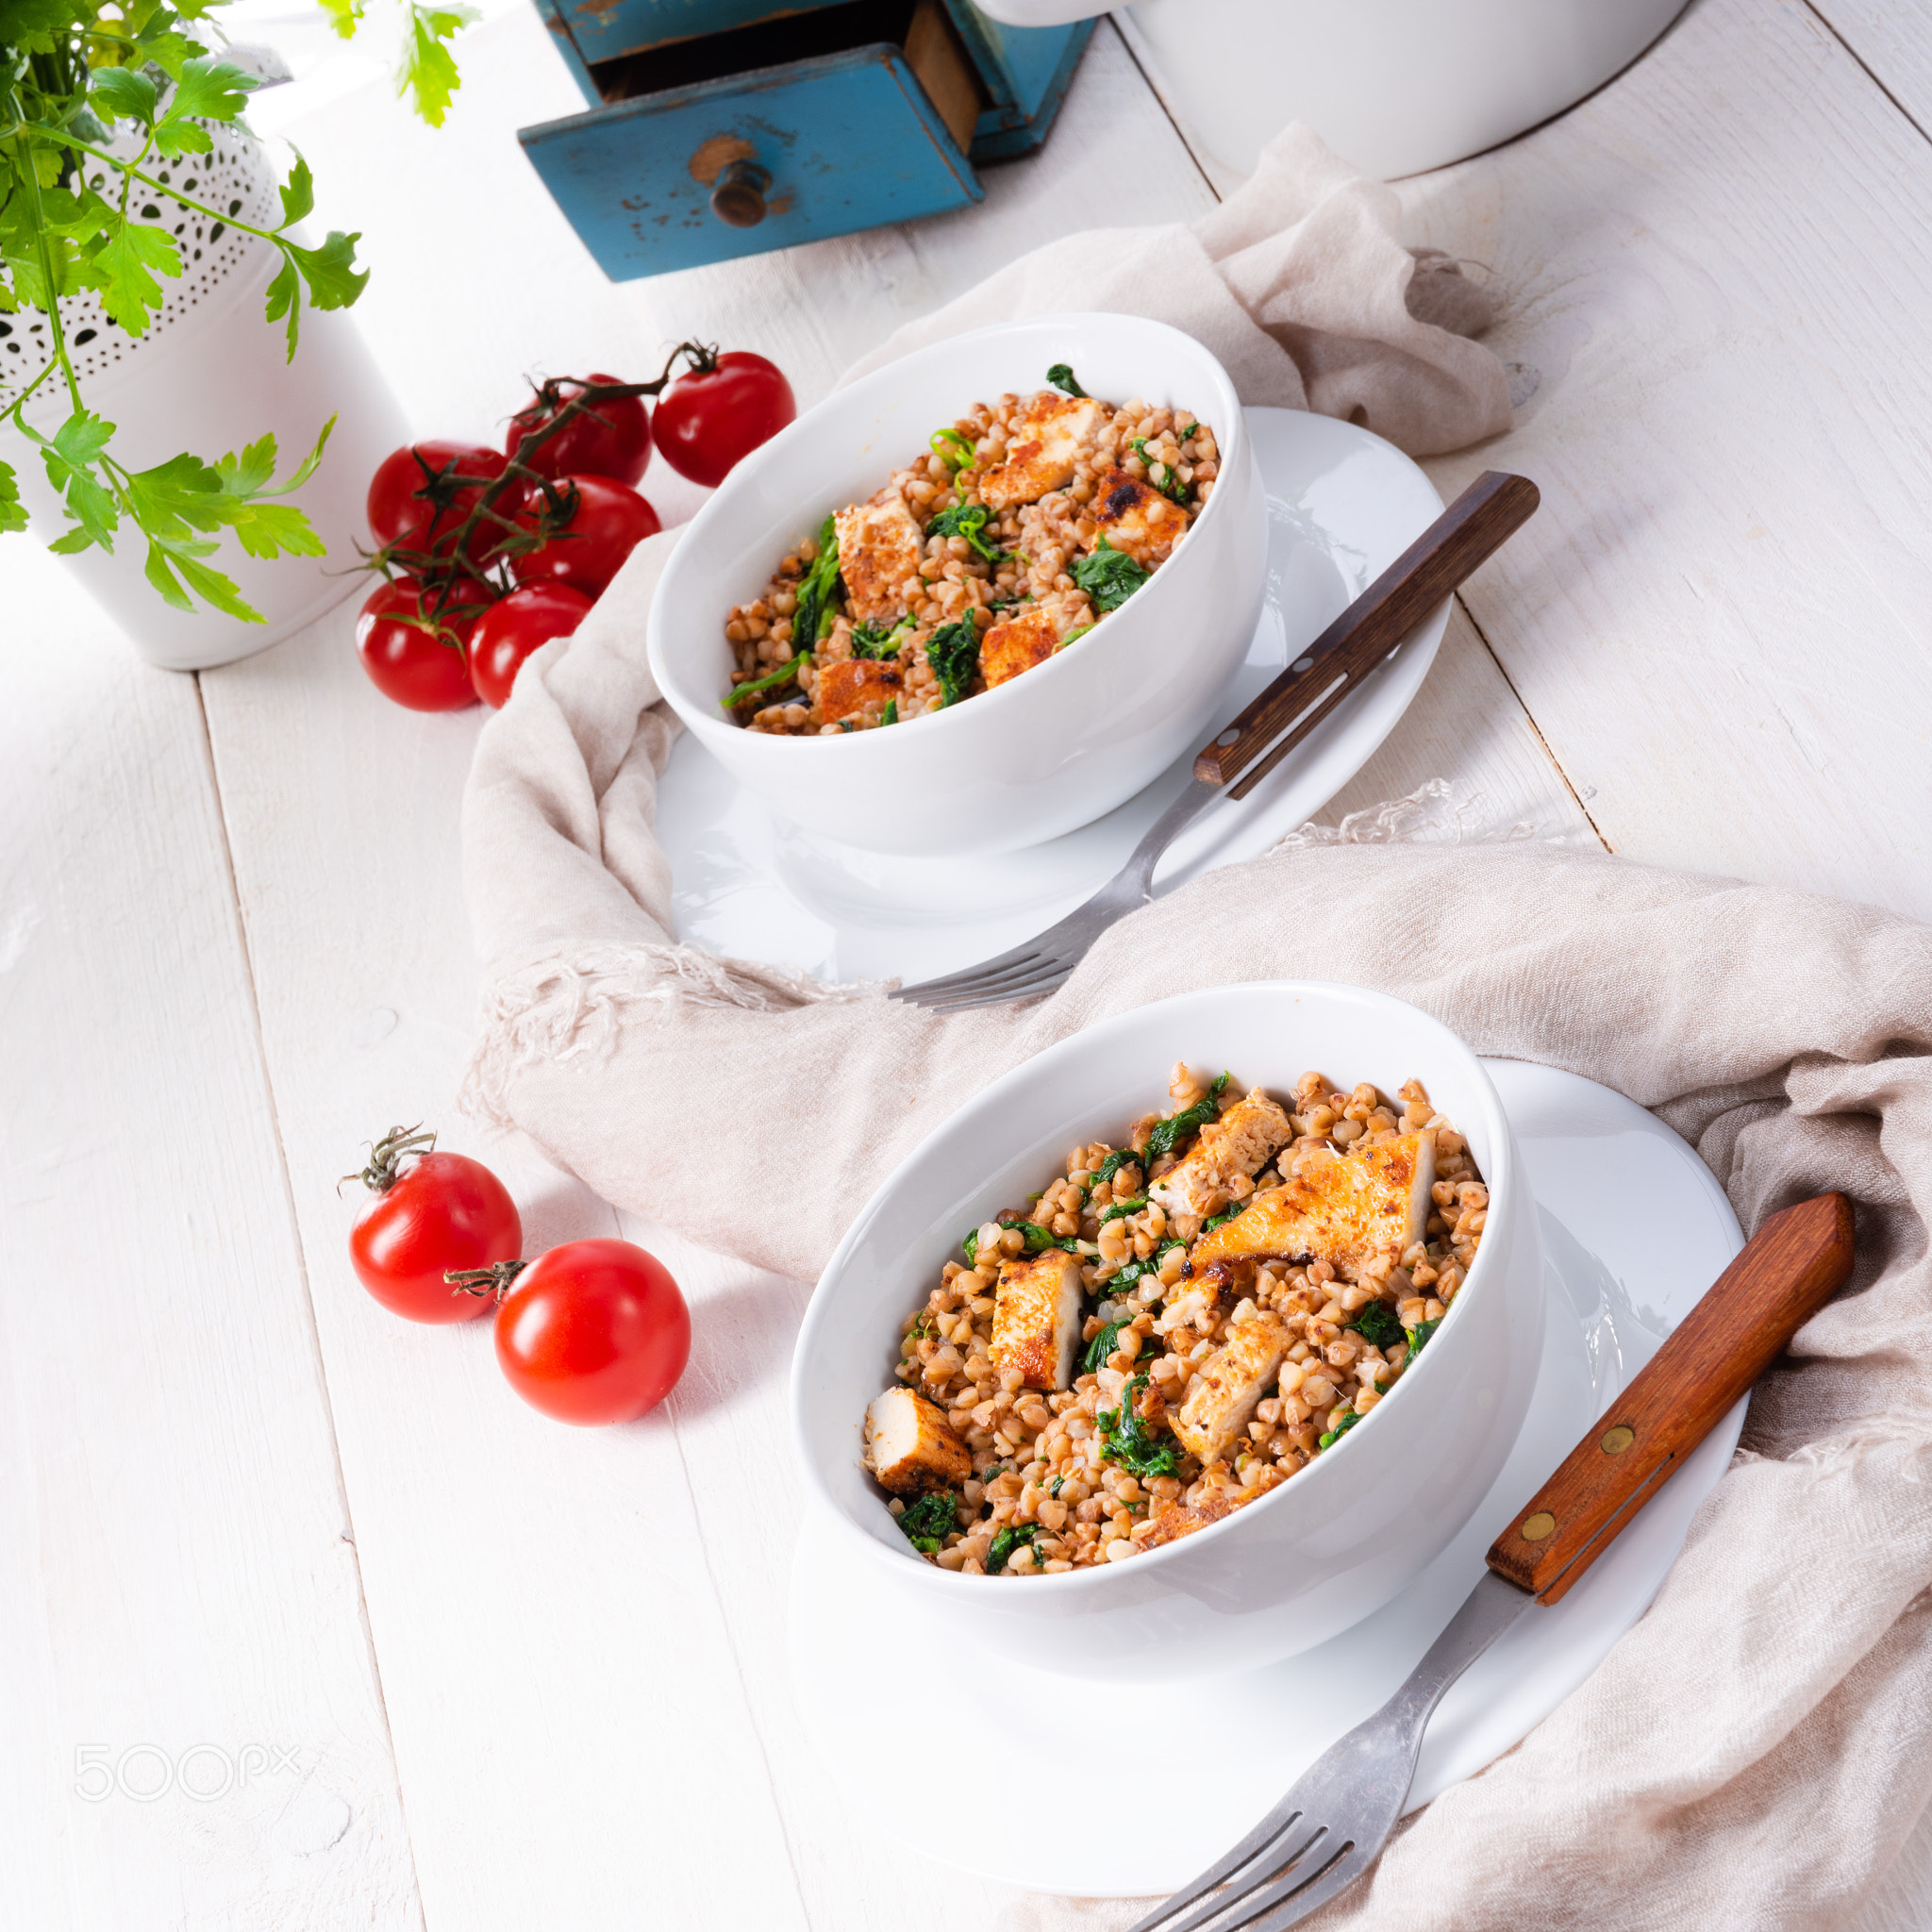 Kaszotto- polish food from buckwheat with grilled chicken